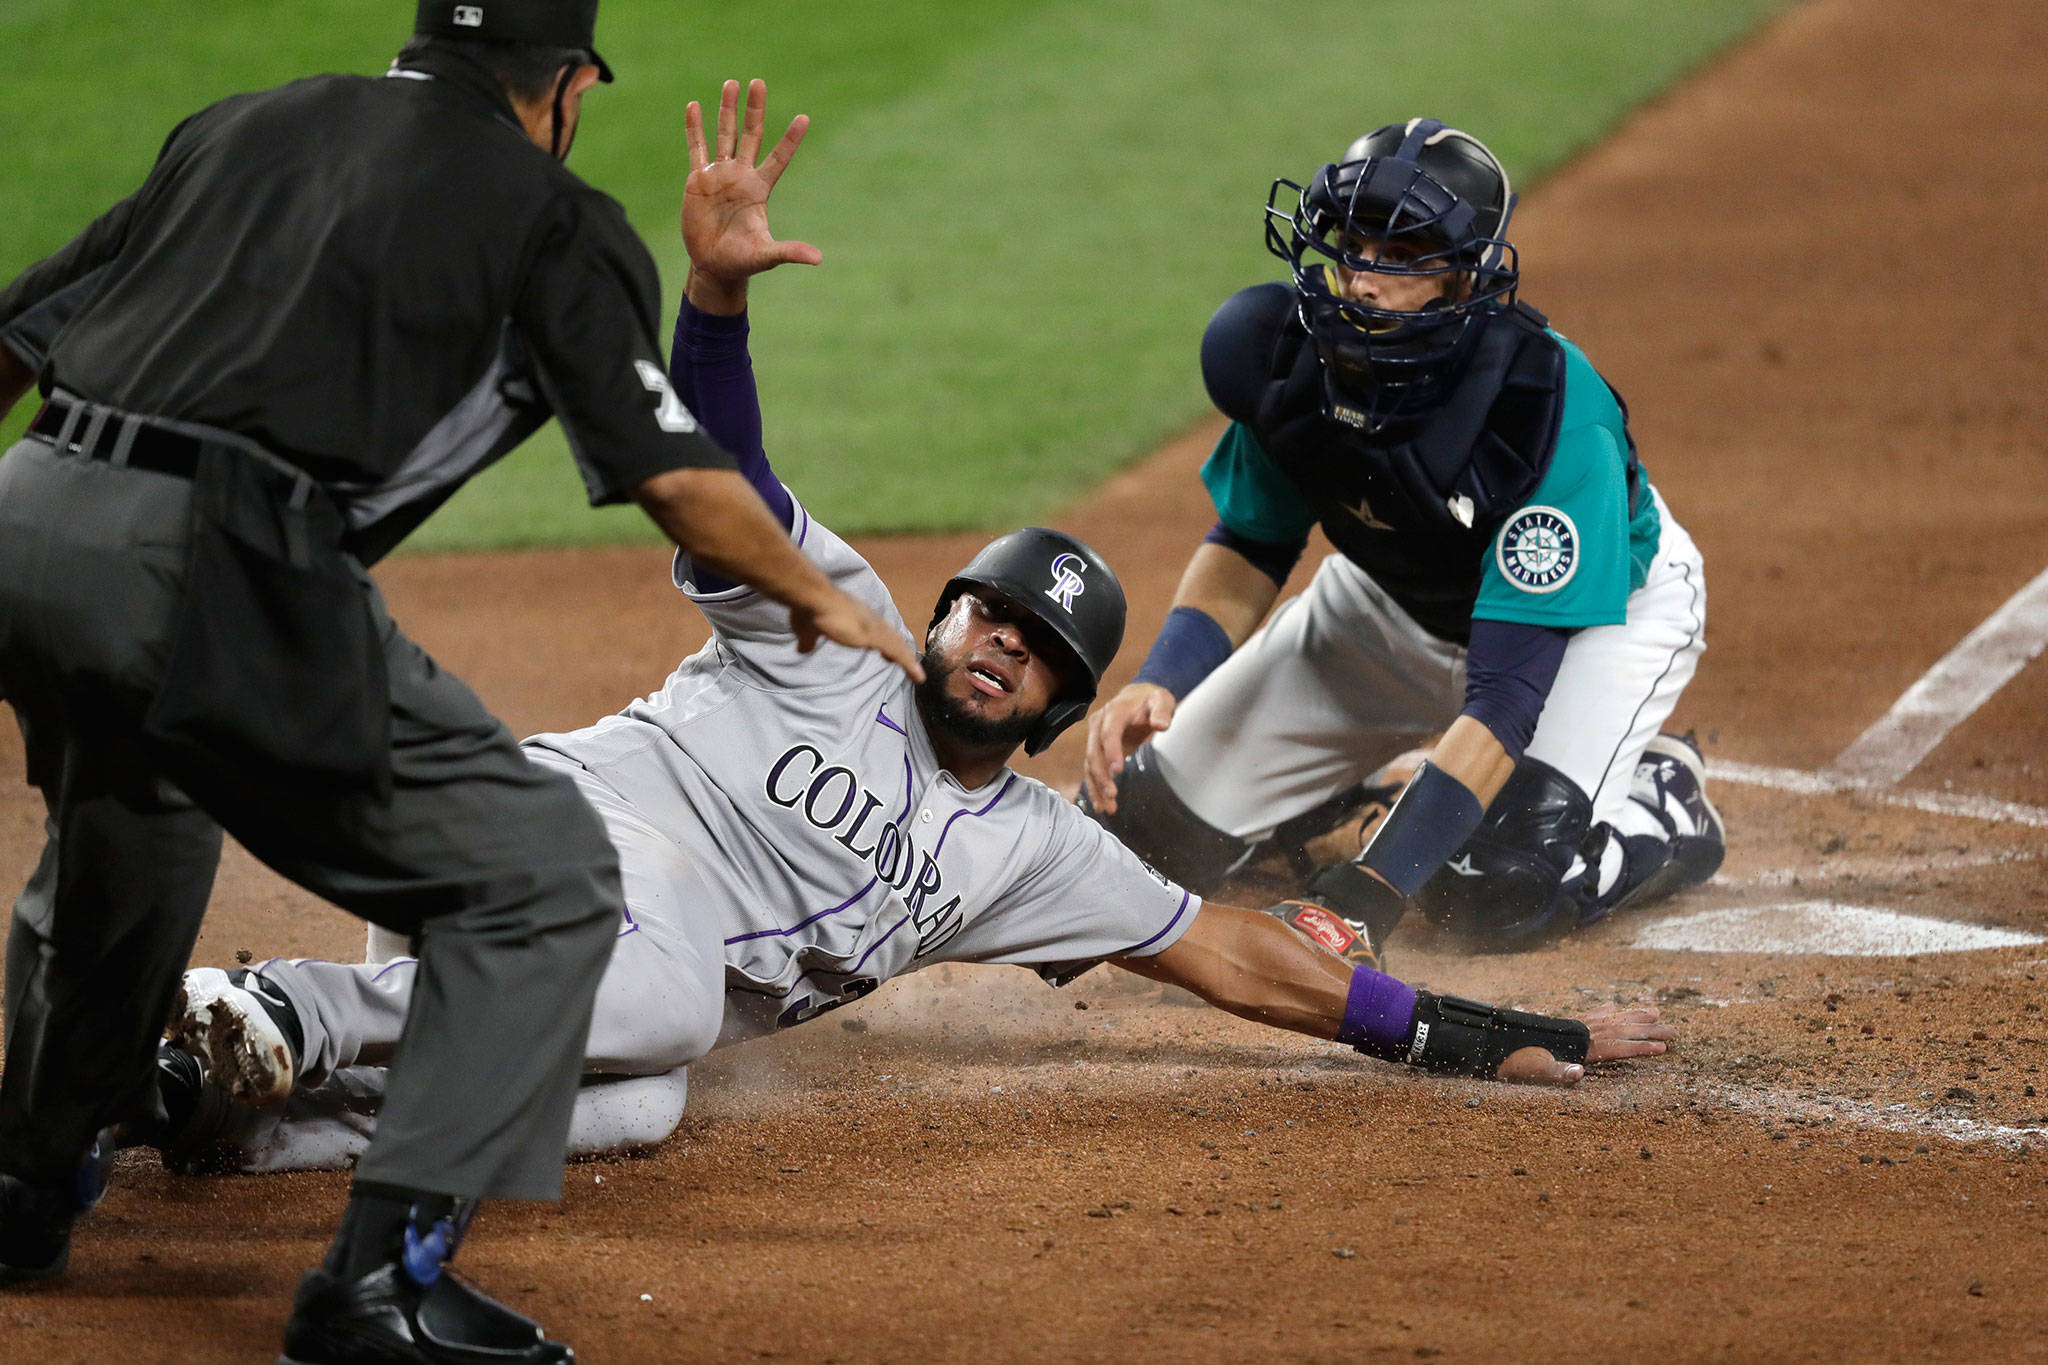 The Rockies’ Elias Diaz and Mariners catcher Austin Nola look up for the call after Diaz safely slid home in the third inning of a game Aug. 7, 2020, in Seattle. (AP Photo/Elaine Thompson)